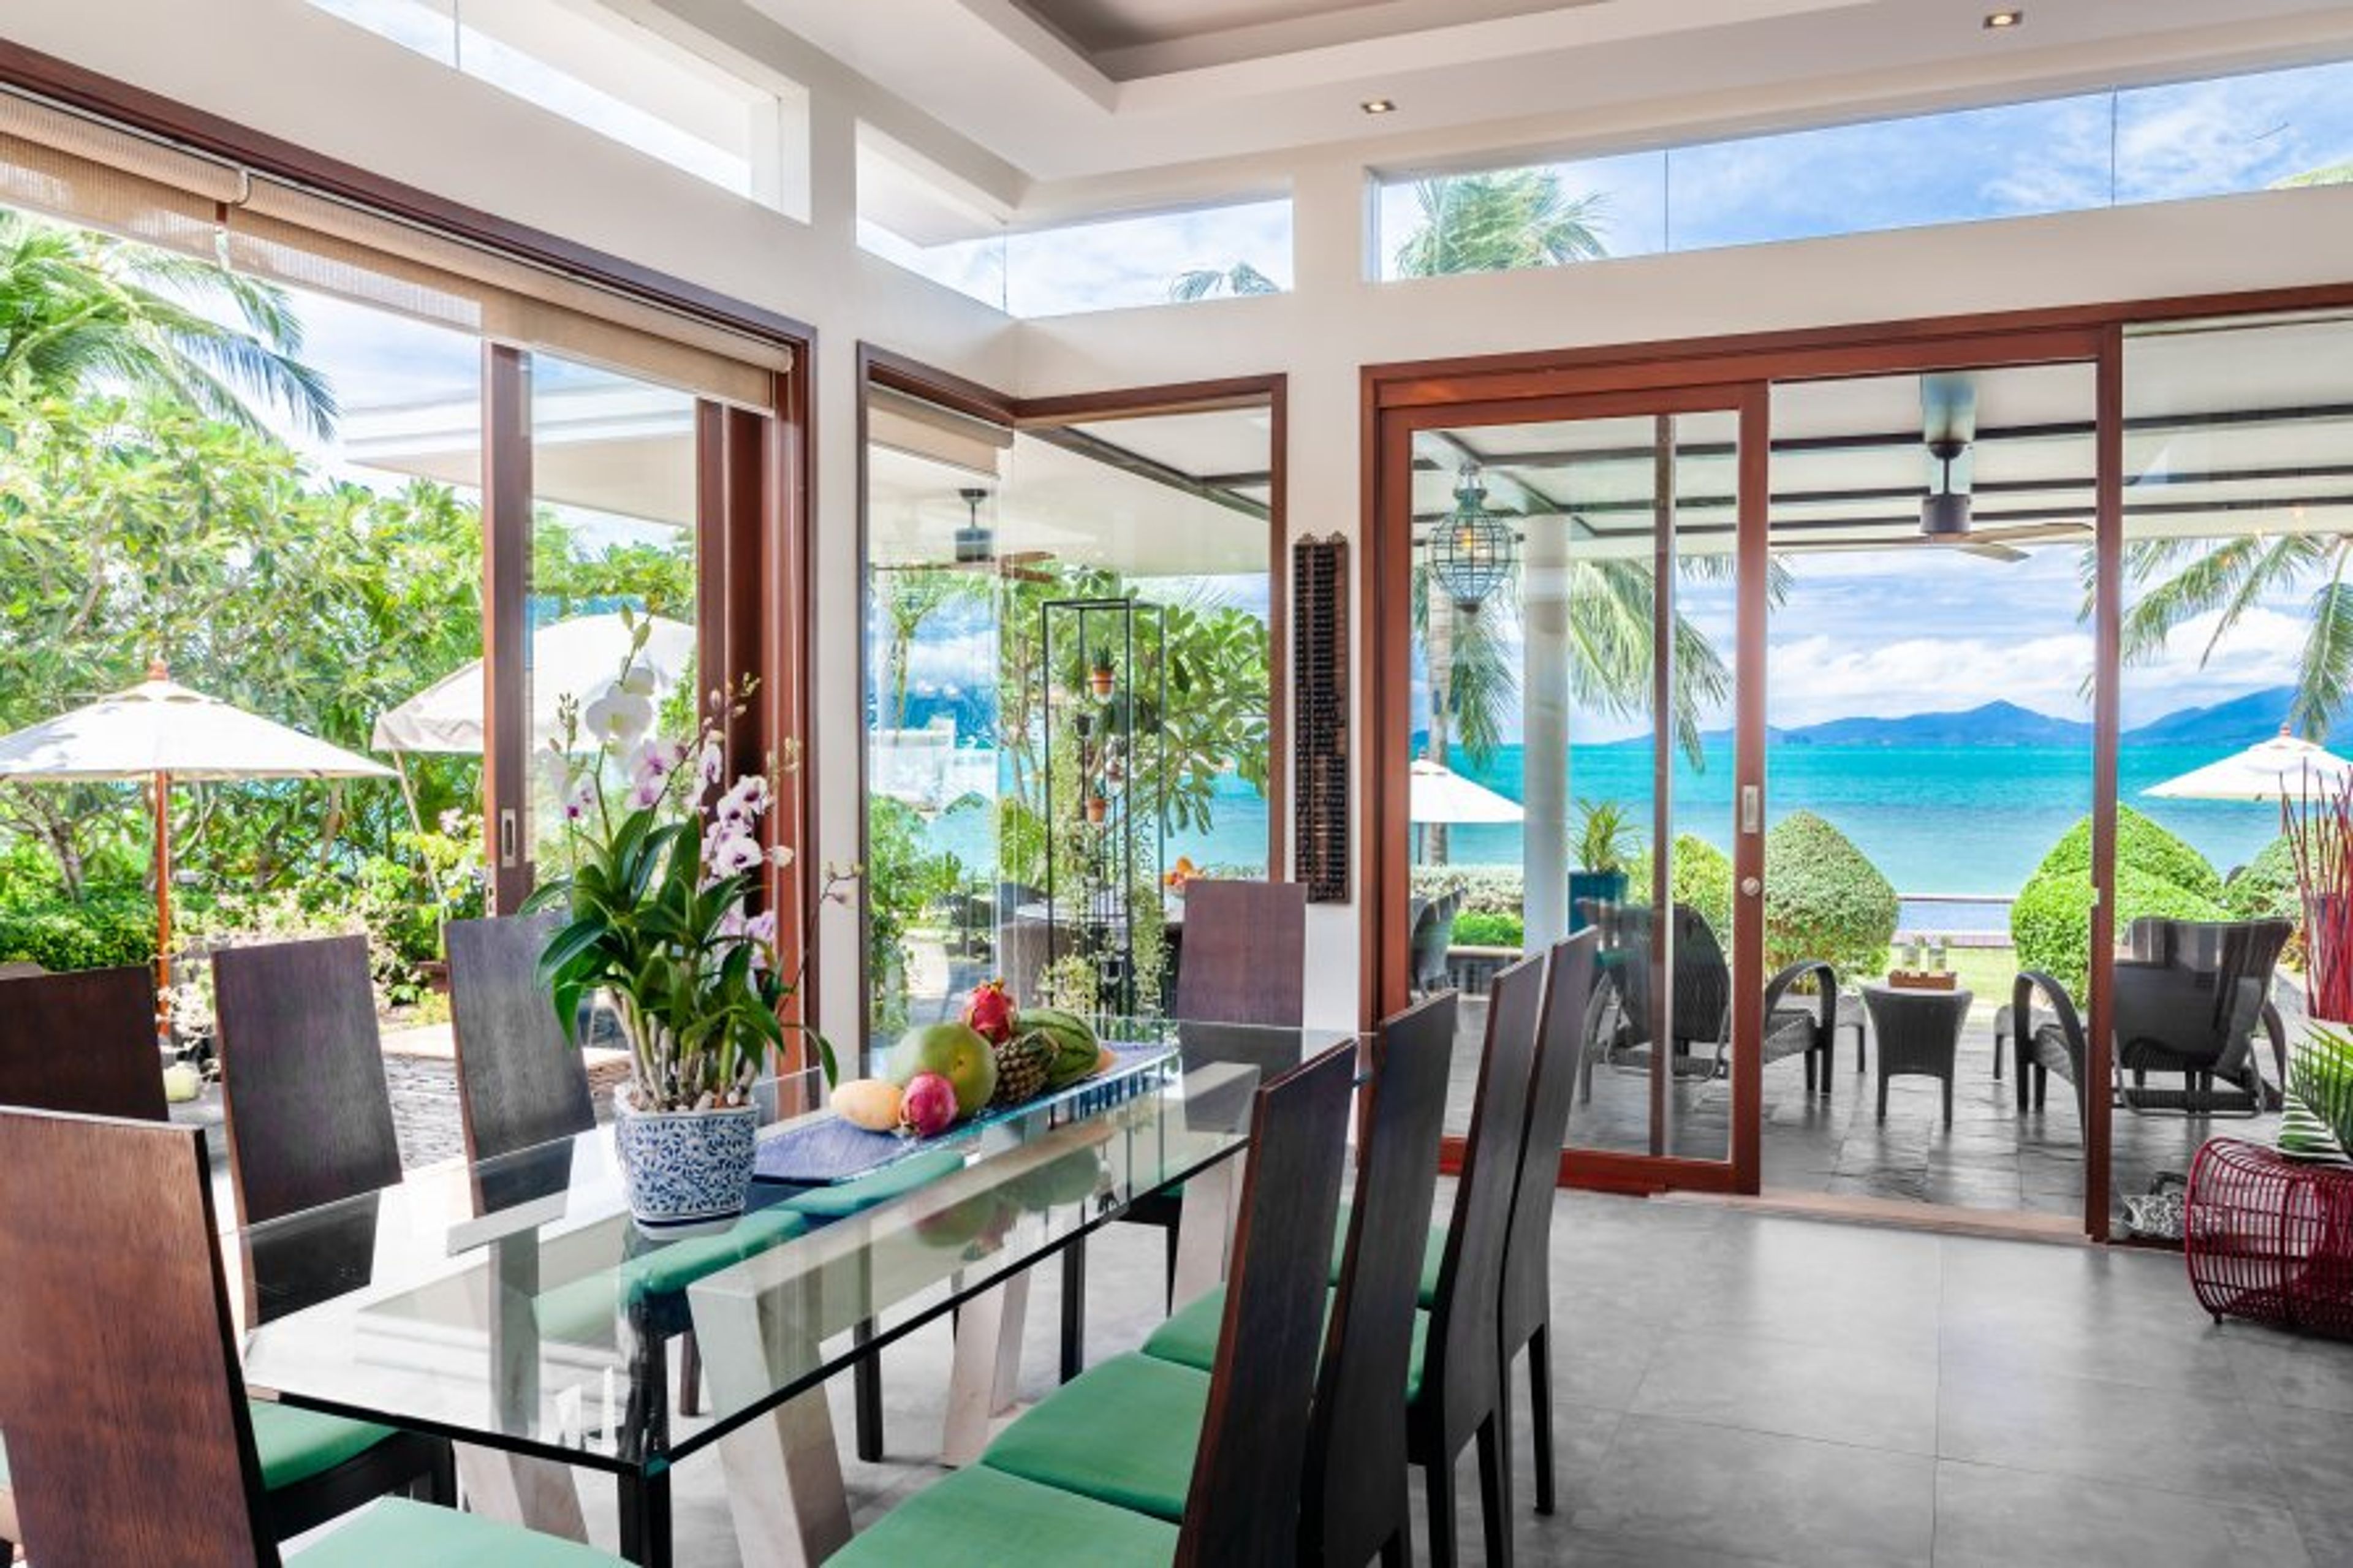 Indoor dining with seaview